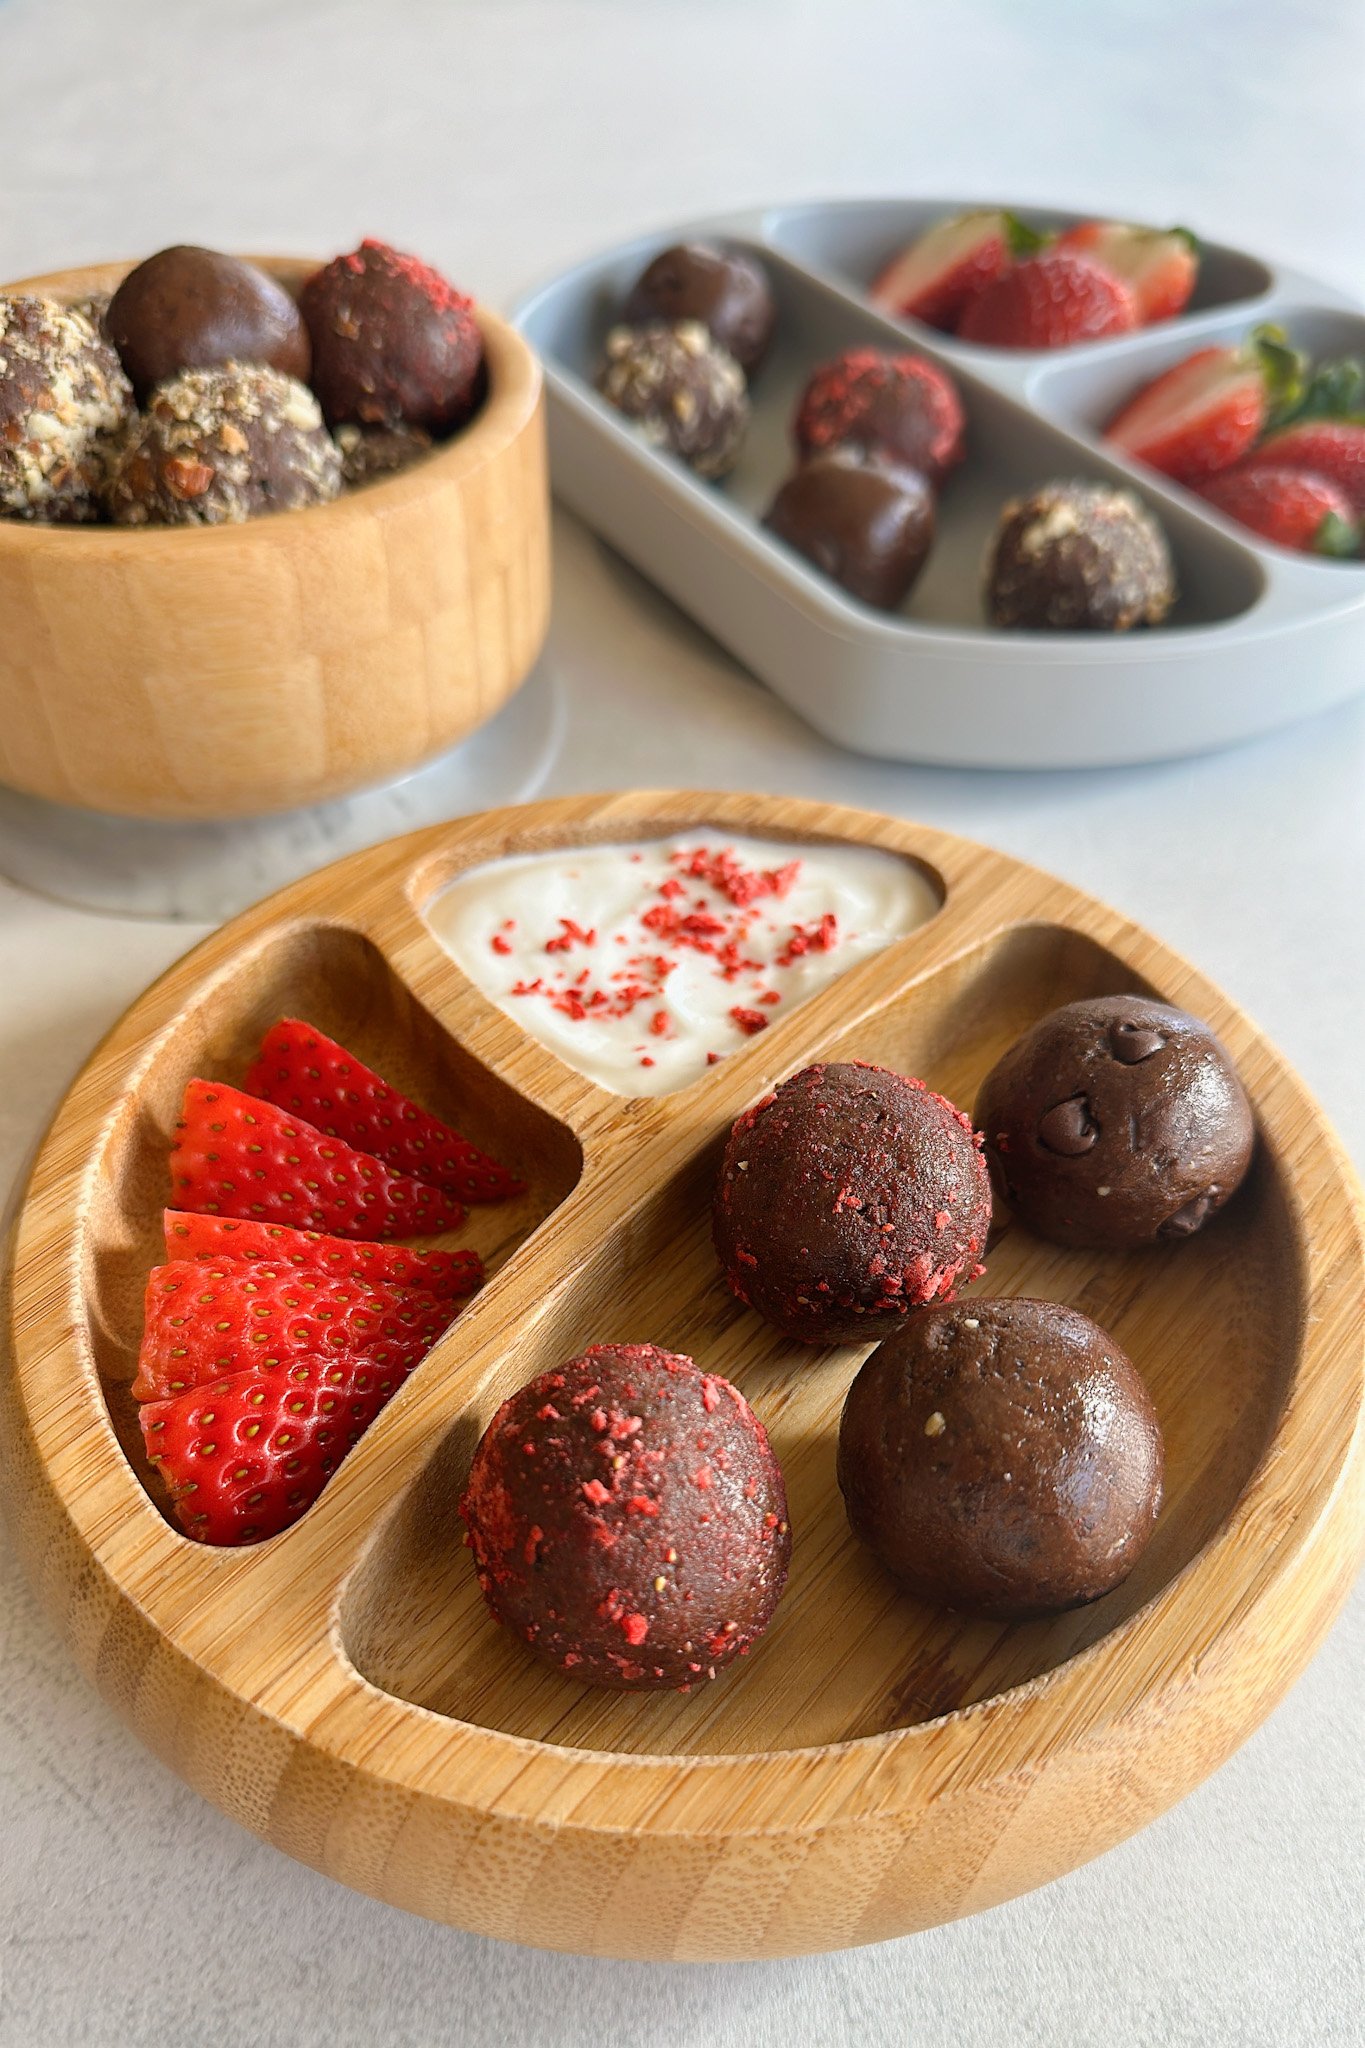 Chocolate balls in a bowl and served with strawberries.